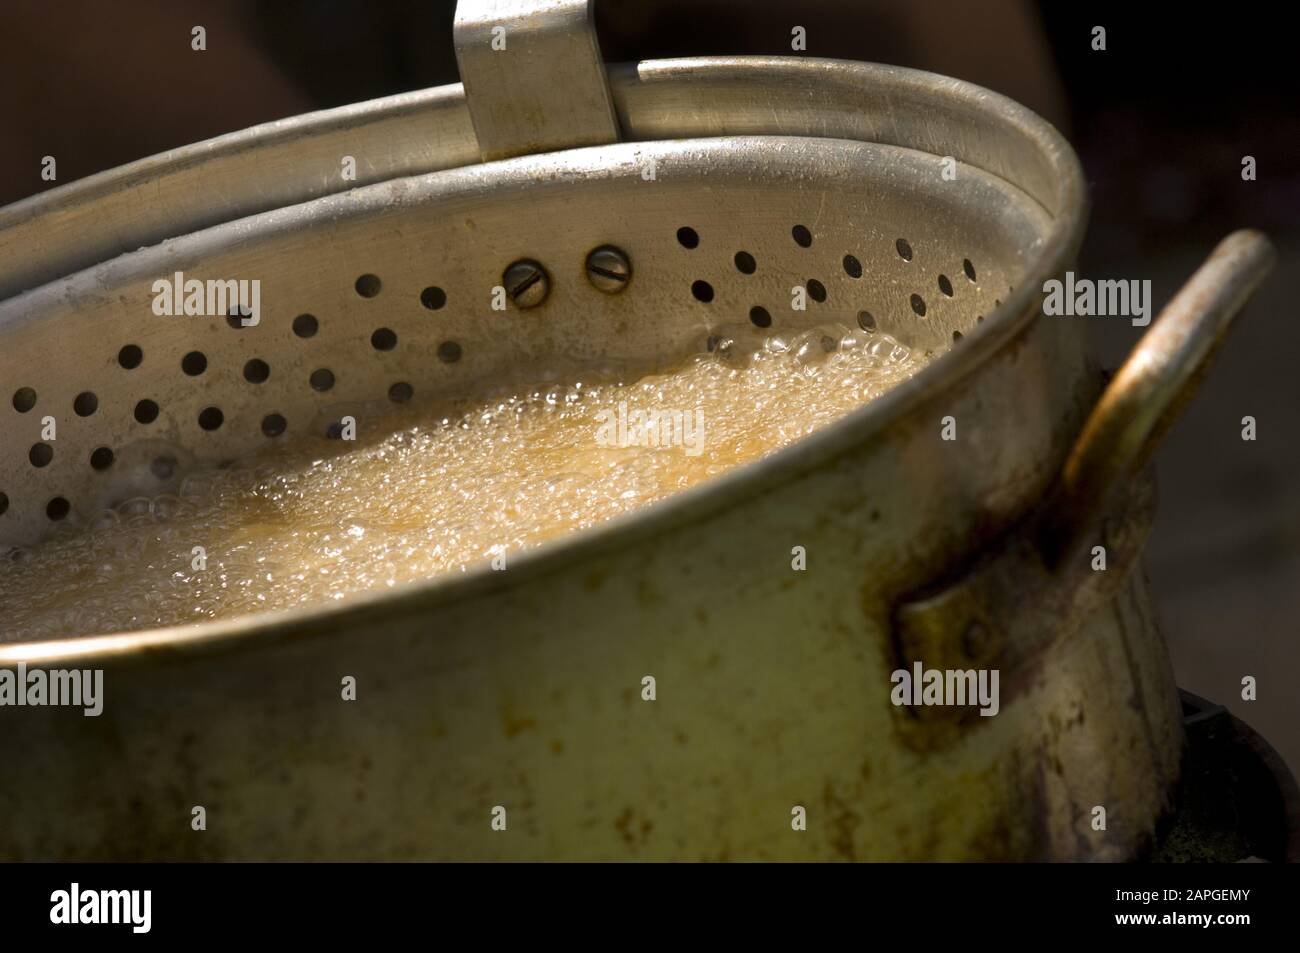 Closeup of a boiling dish in a rusty old pot under the lights with a blurry background Stock Photo